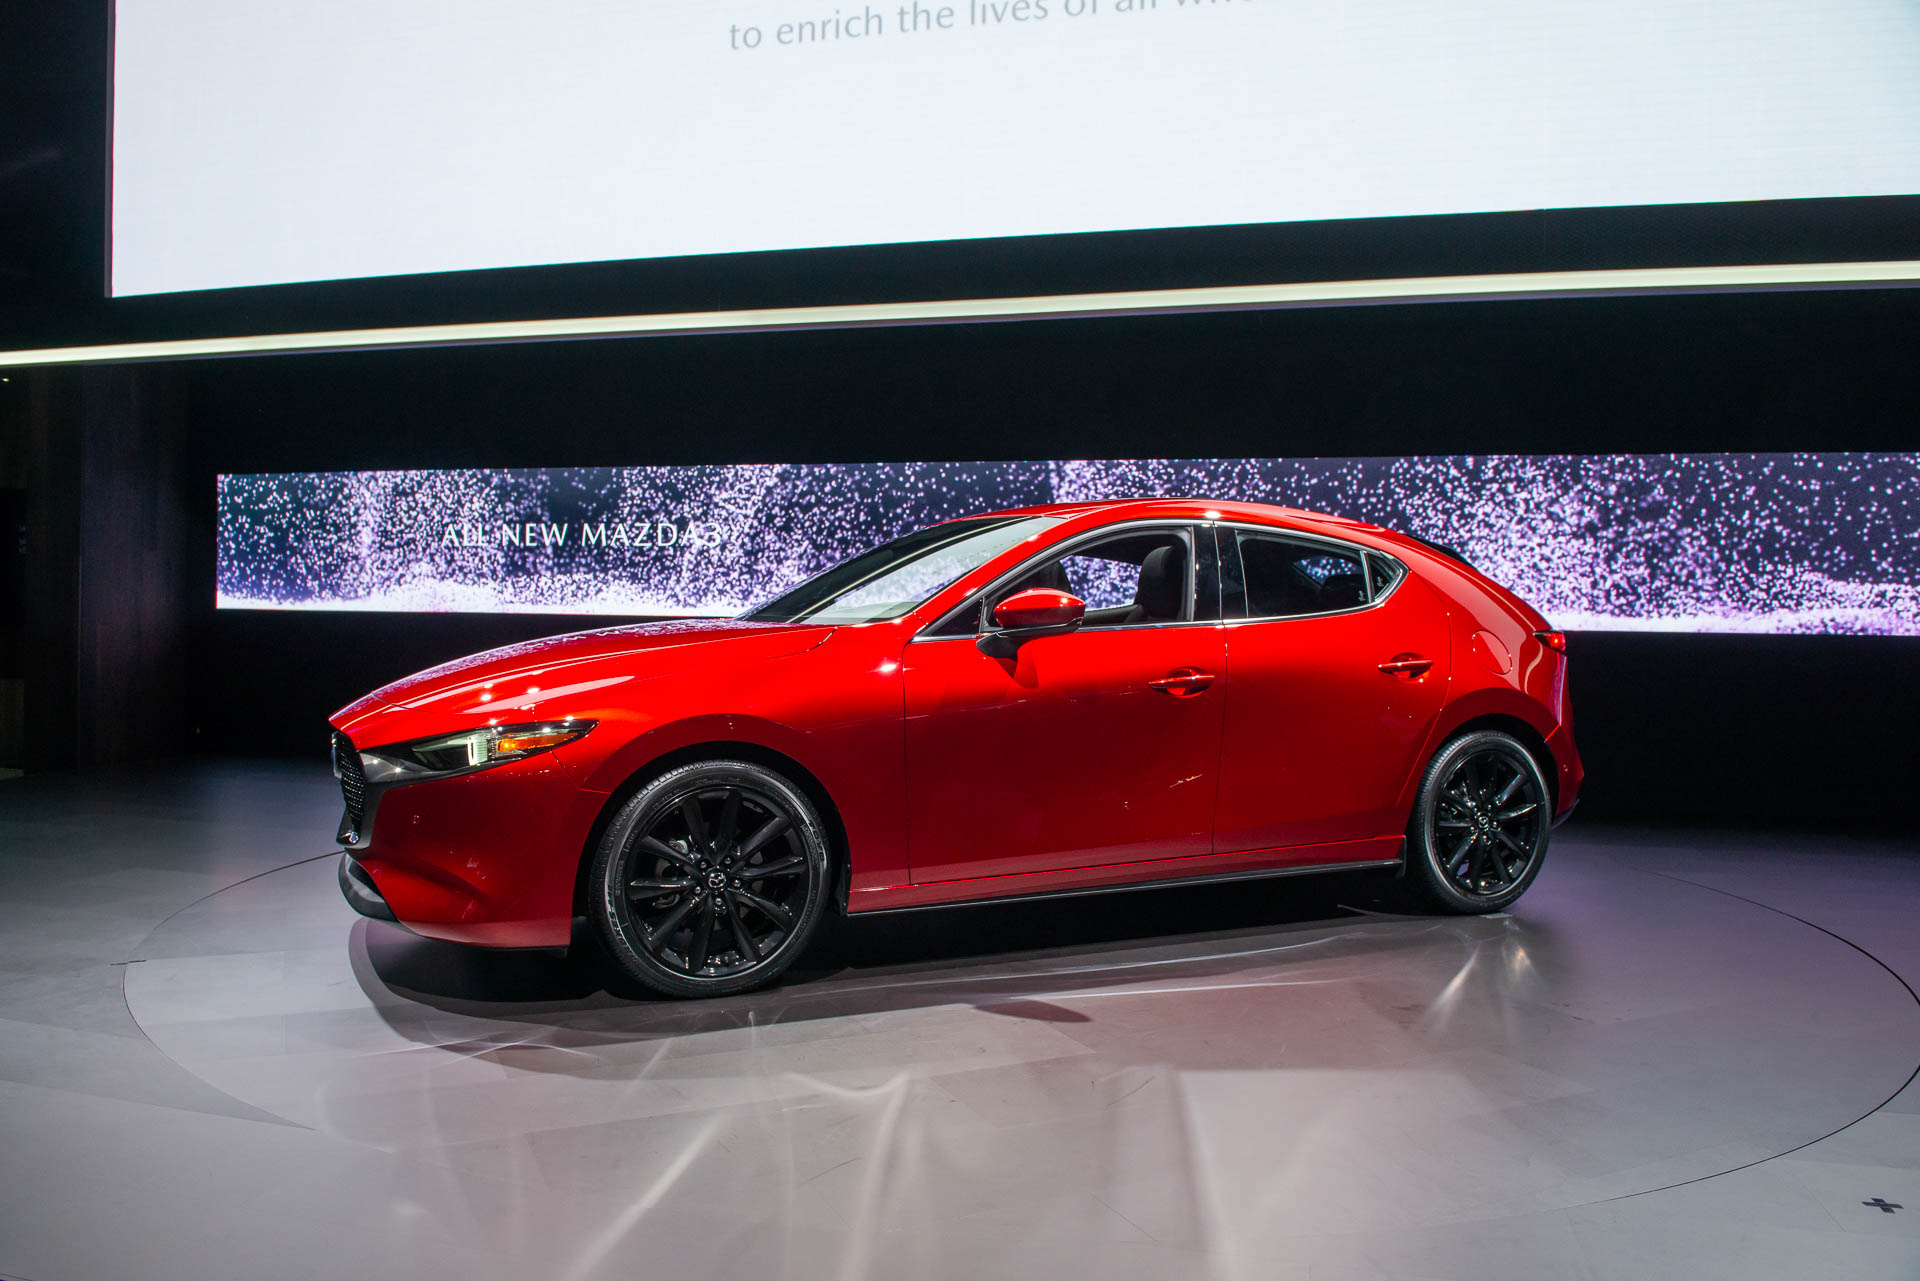 2019 Mazda 3 bows with new look, upgraded tech